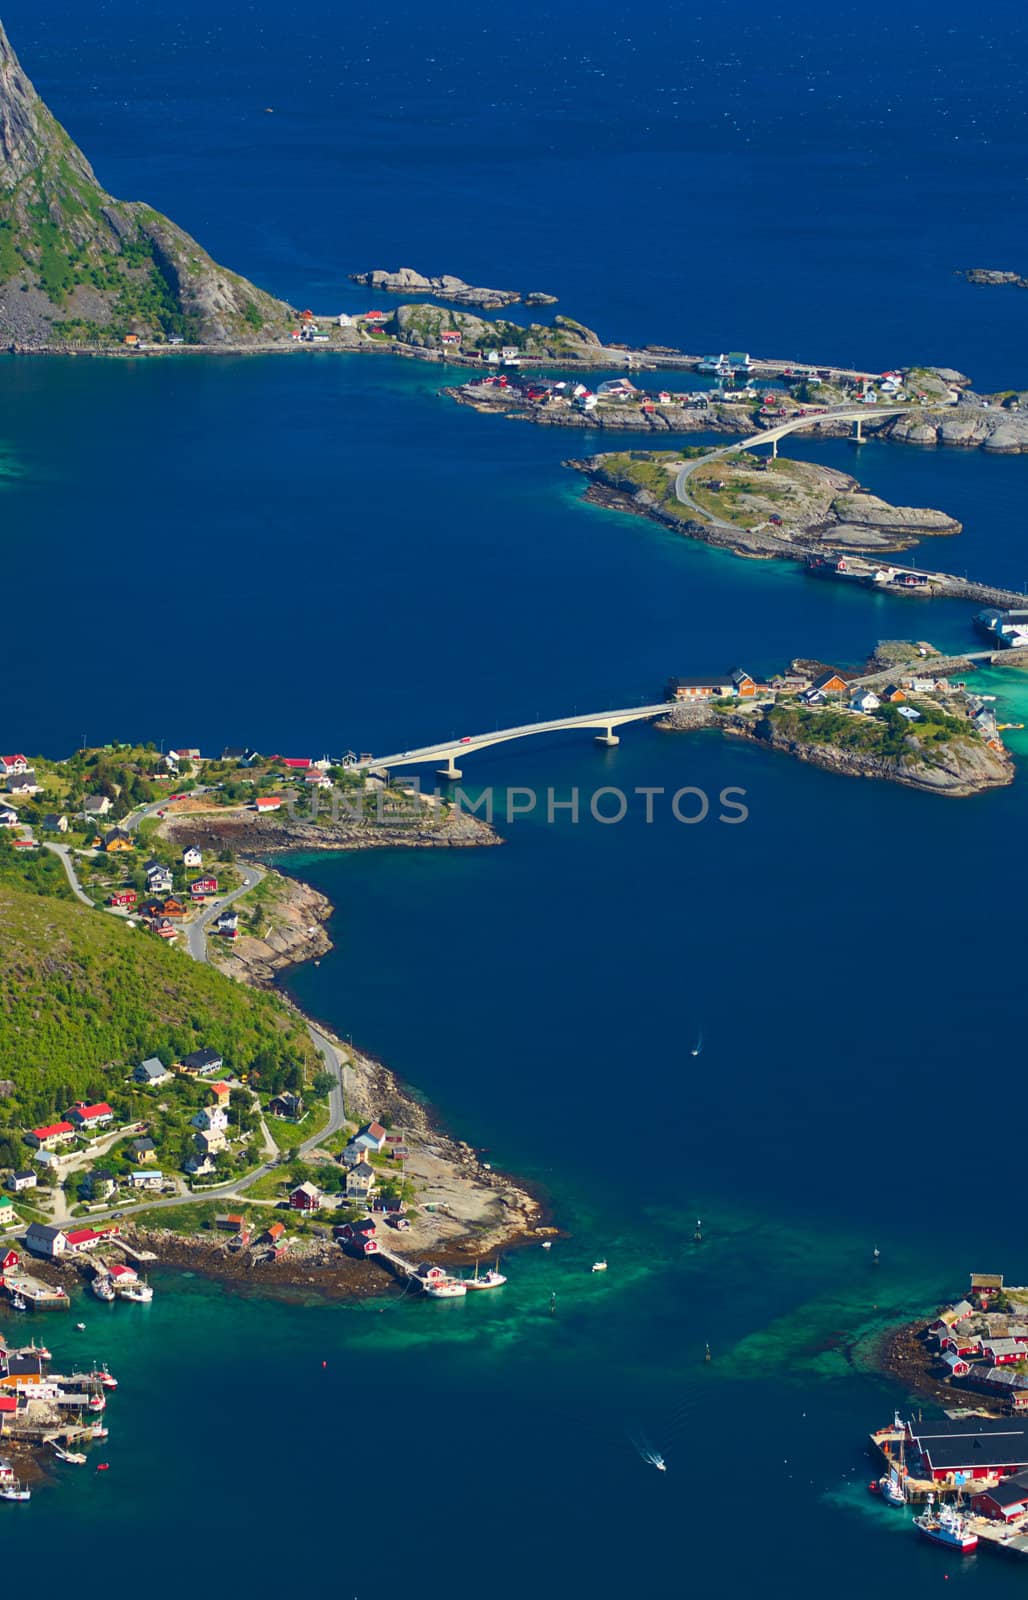 The skerries around the small coastal town of Reine on Moskenesoya, Lofoten, Norway photographed from the Reinebringen 